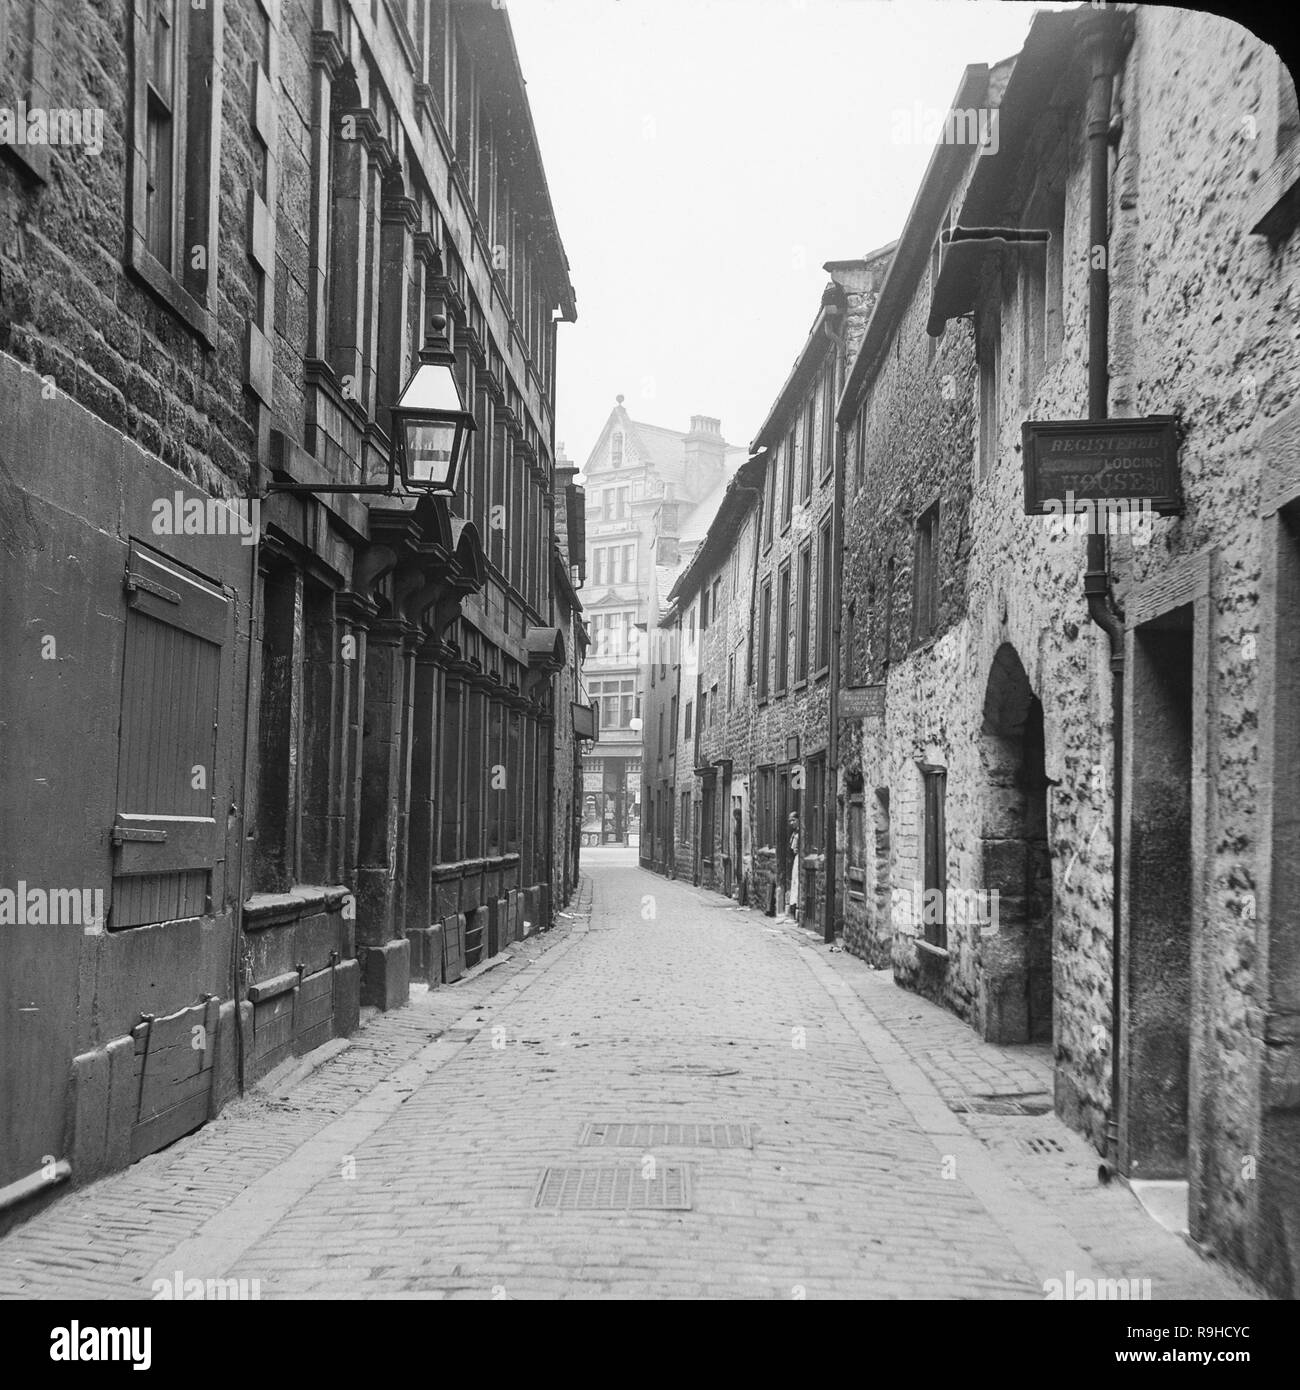 China Lane in Manchester, England. A late Victorian black and white photograph showing houses and buildings. There are two houses advertising as Boarding or Lodging houses, and two women can be seen standing in doorways. Stock Photo